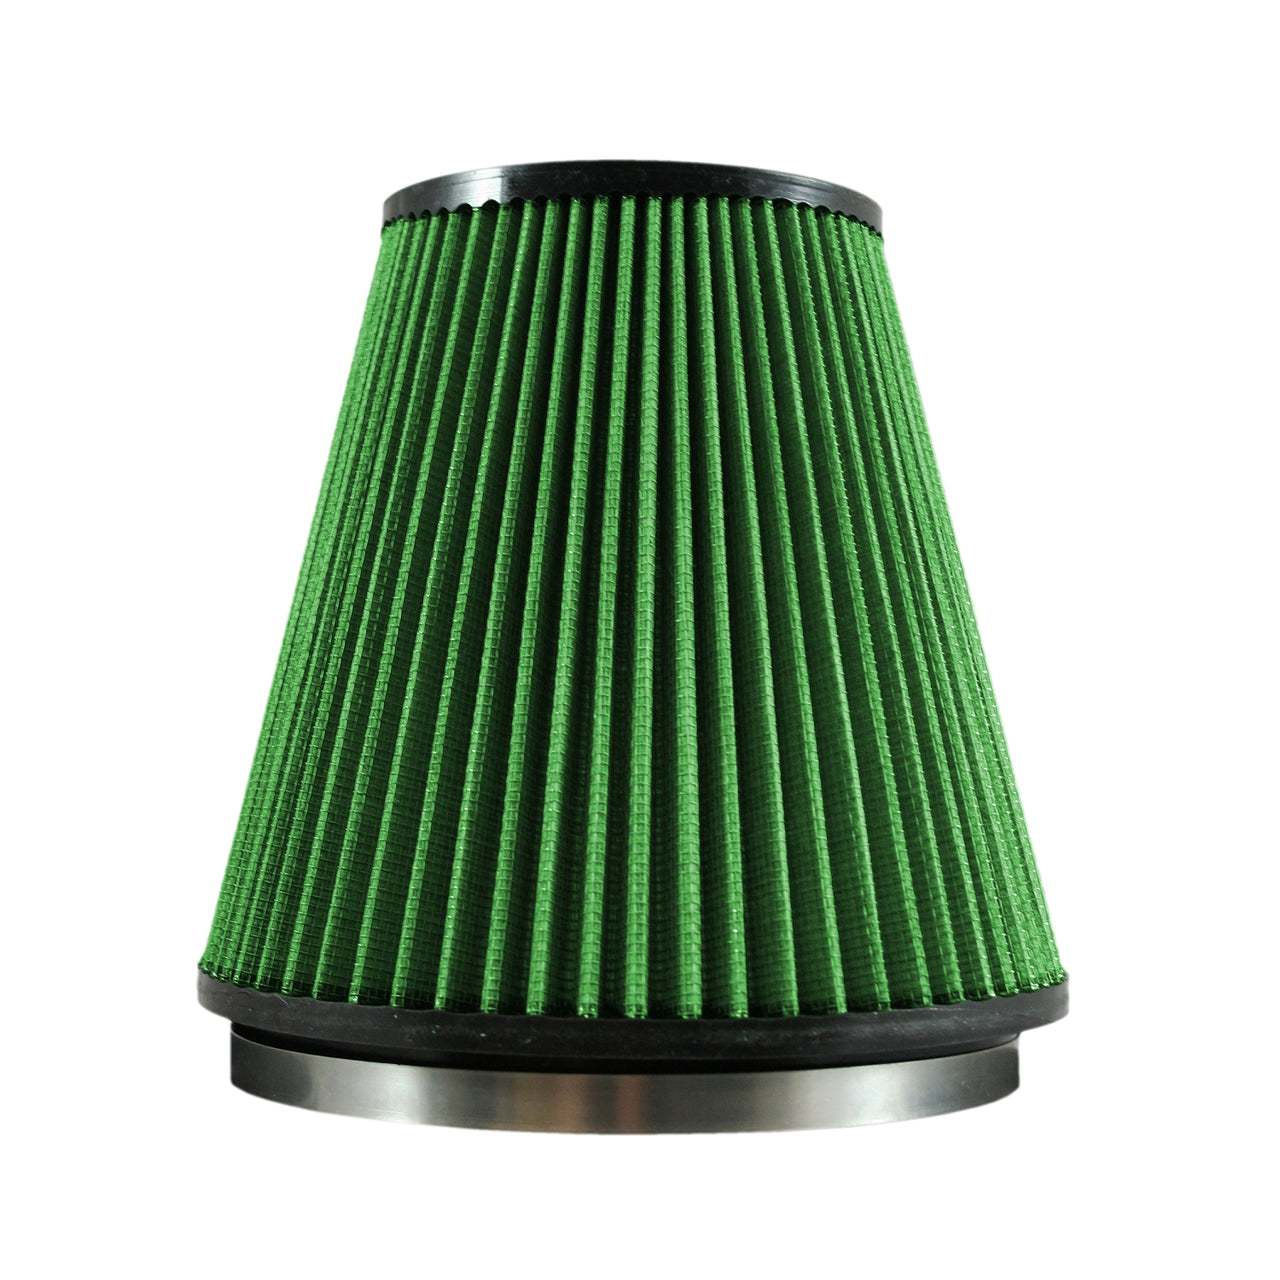 Green Filter Cone Filter - ID 7in. / Base 8.5in. / Top 5in. / H 8in.